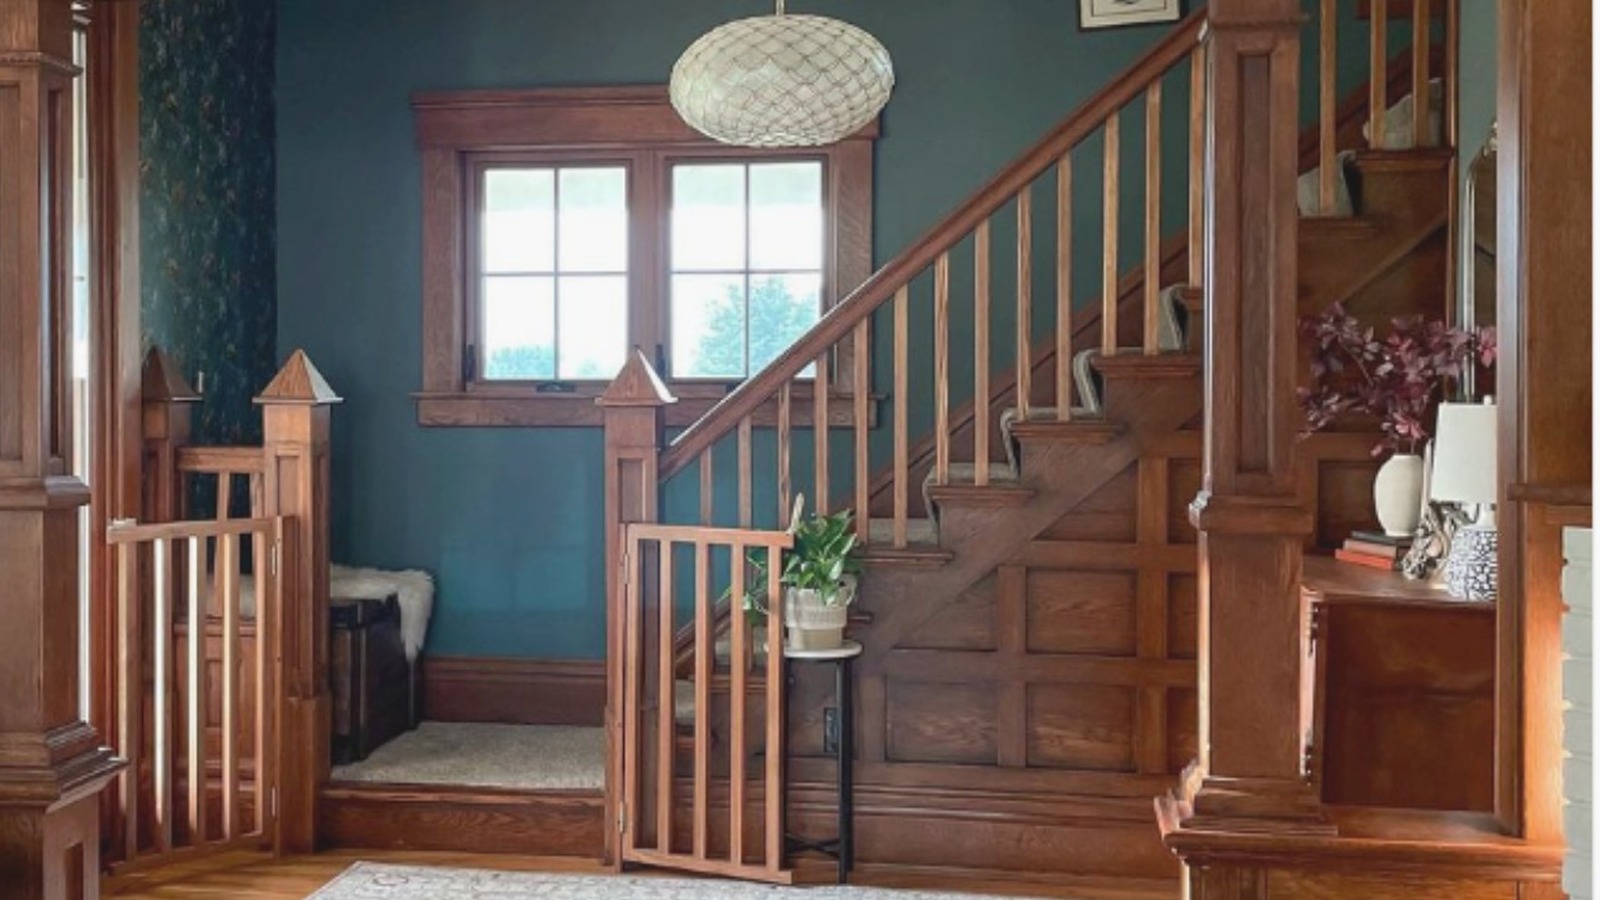 The Pros & Cons Of Painting Wood Trim - Modern Painting & Remodeling